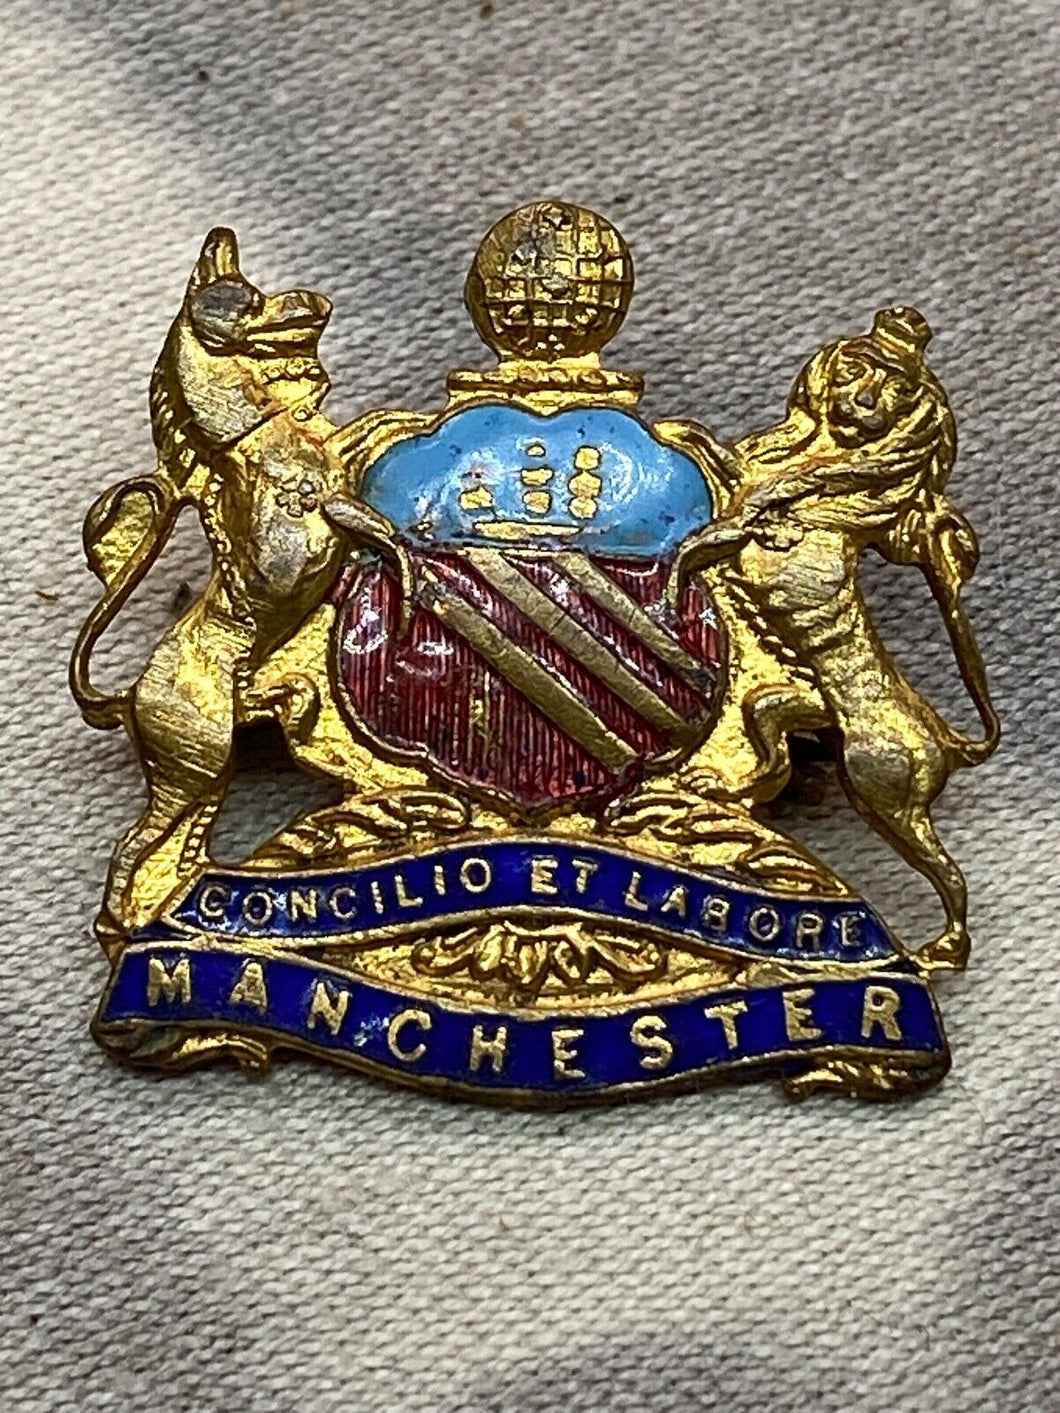 British Army - The Manchester Regiment Sweetheart Brooch